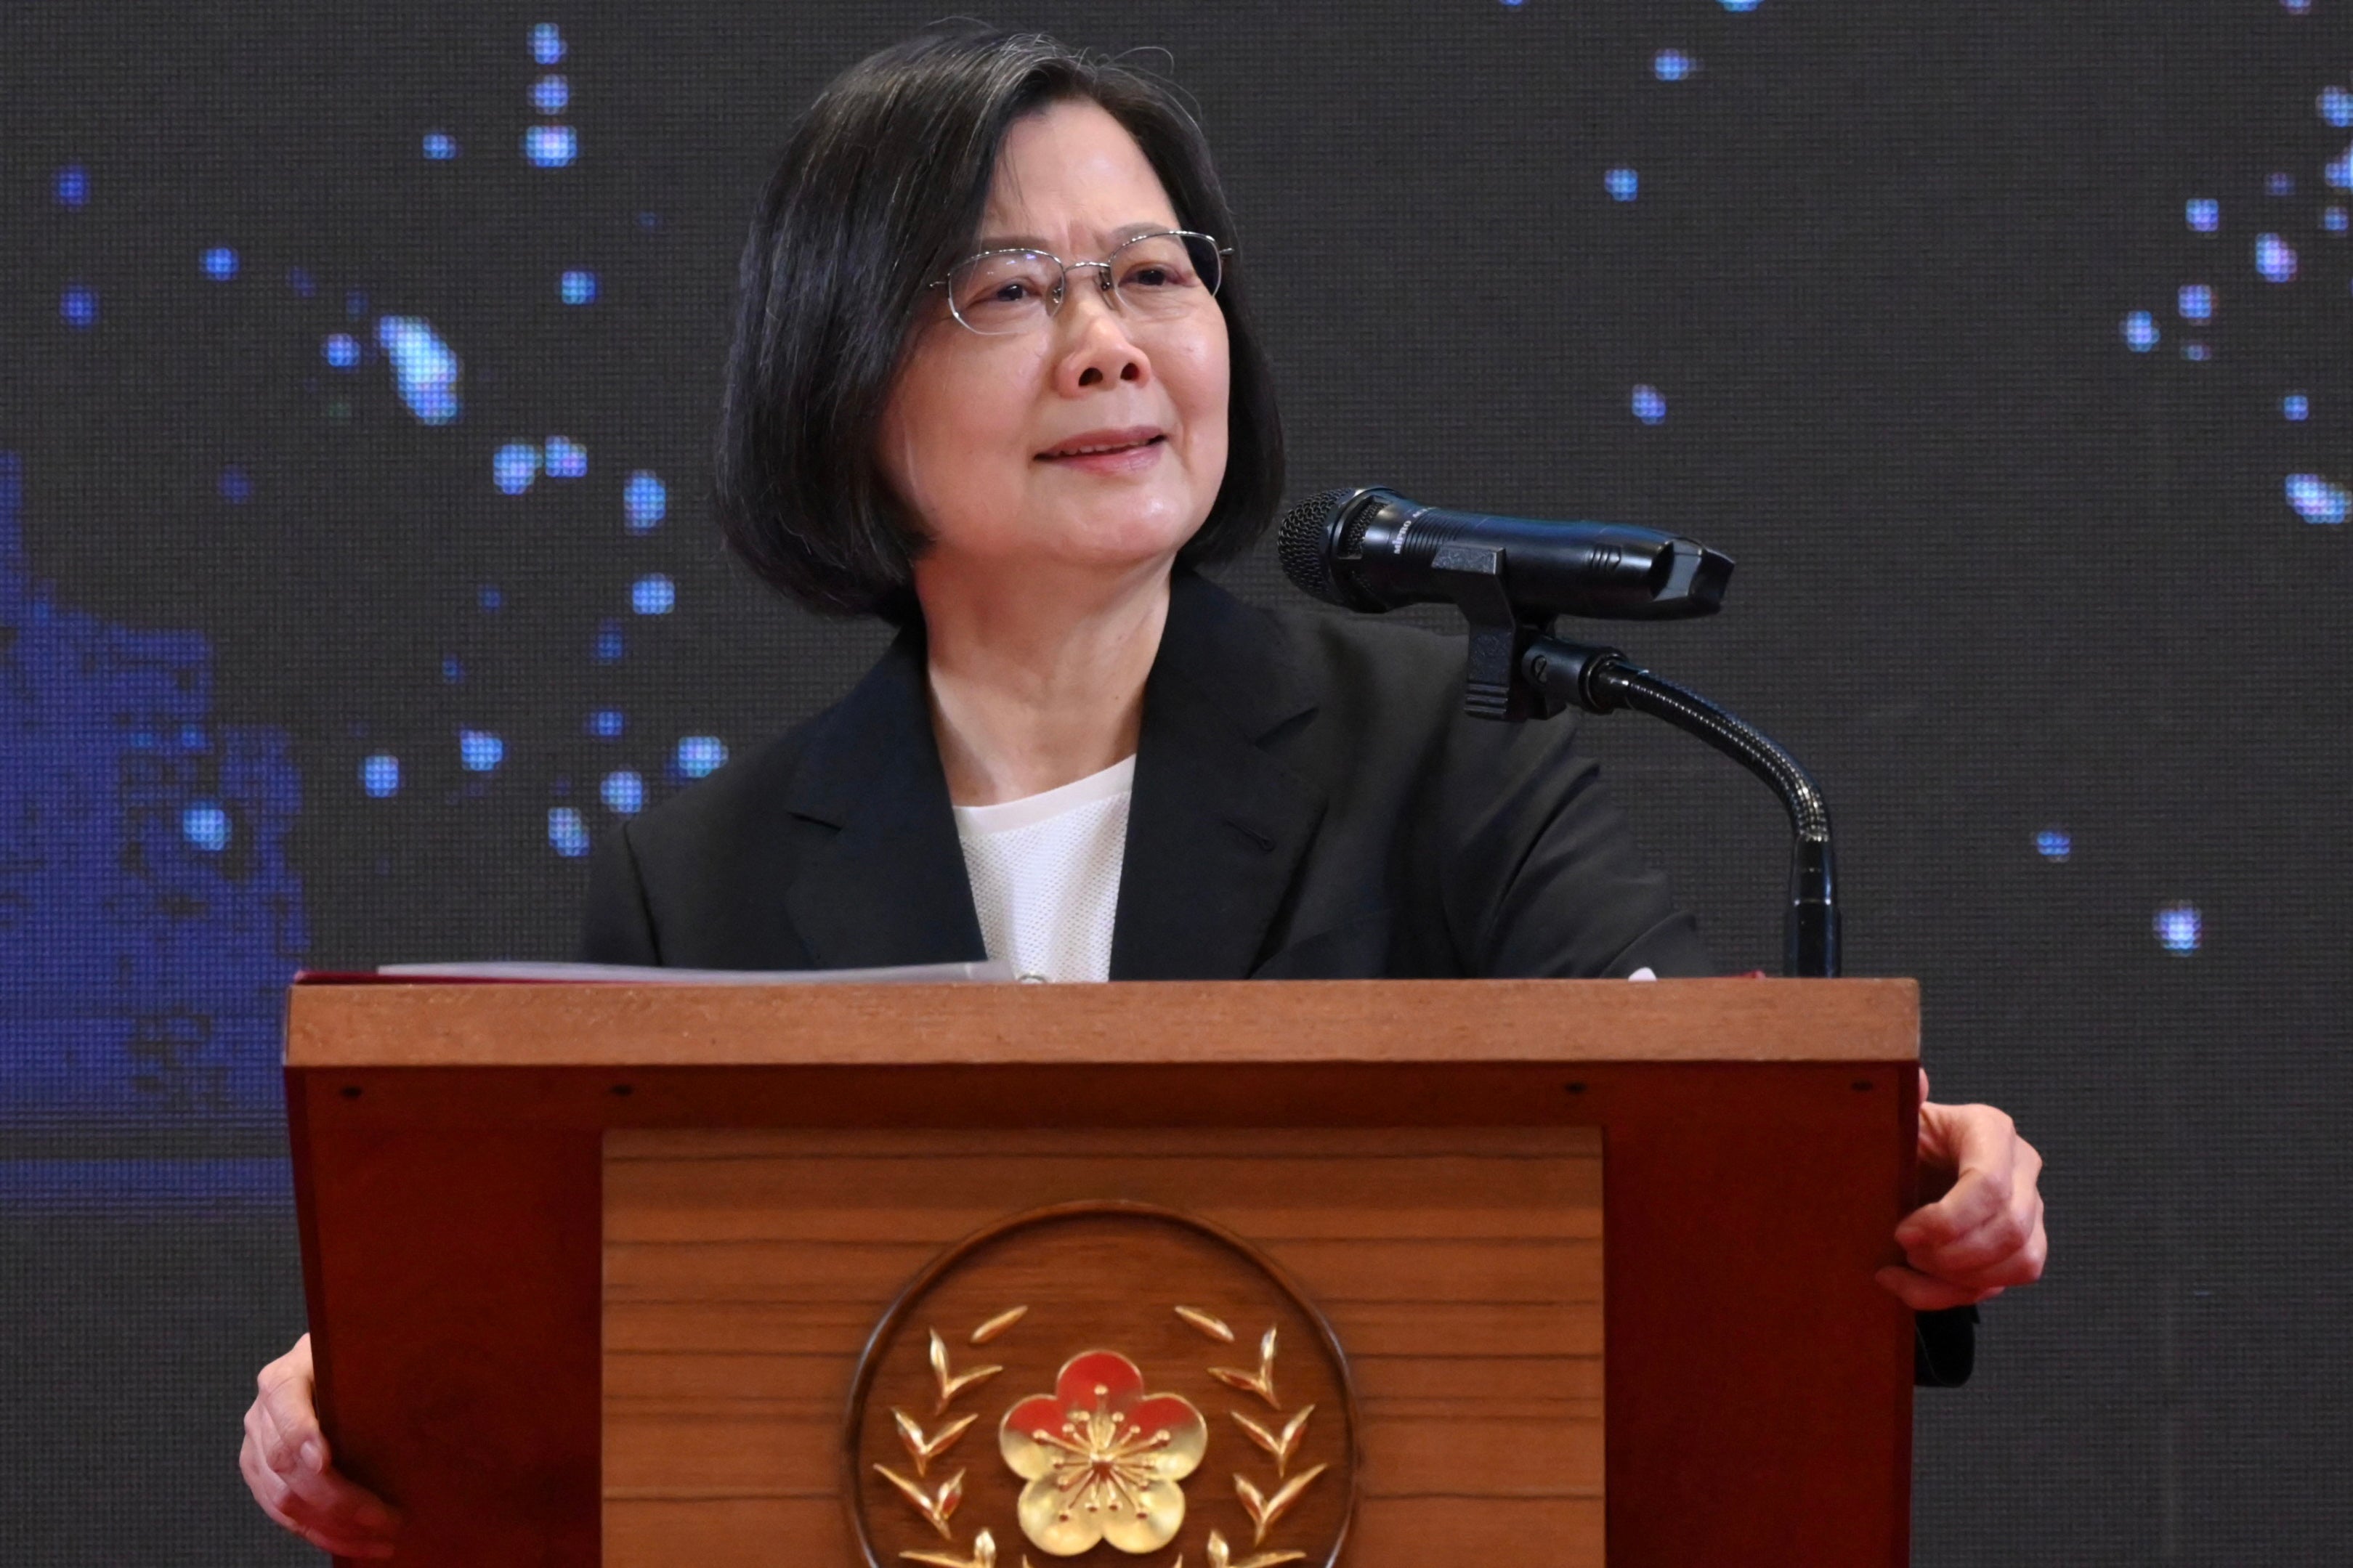 Taiwan’s president Tsai Ing-wen speaks during a press conference on the seventh anniversary of her tenure, at the Presidential Office in Taipei